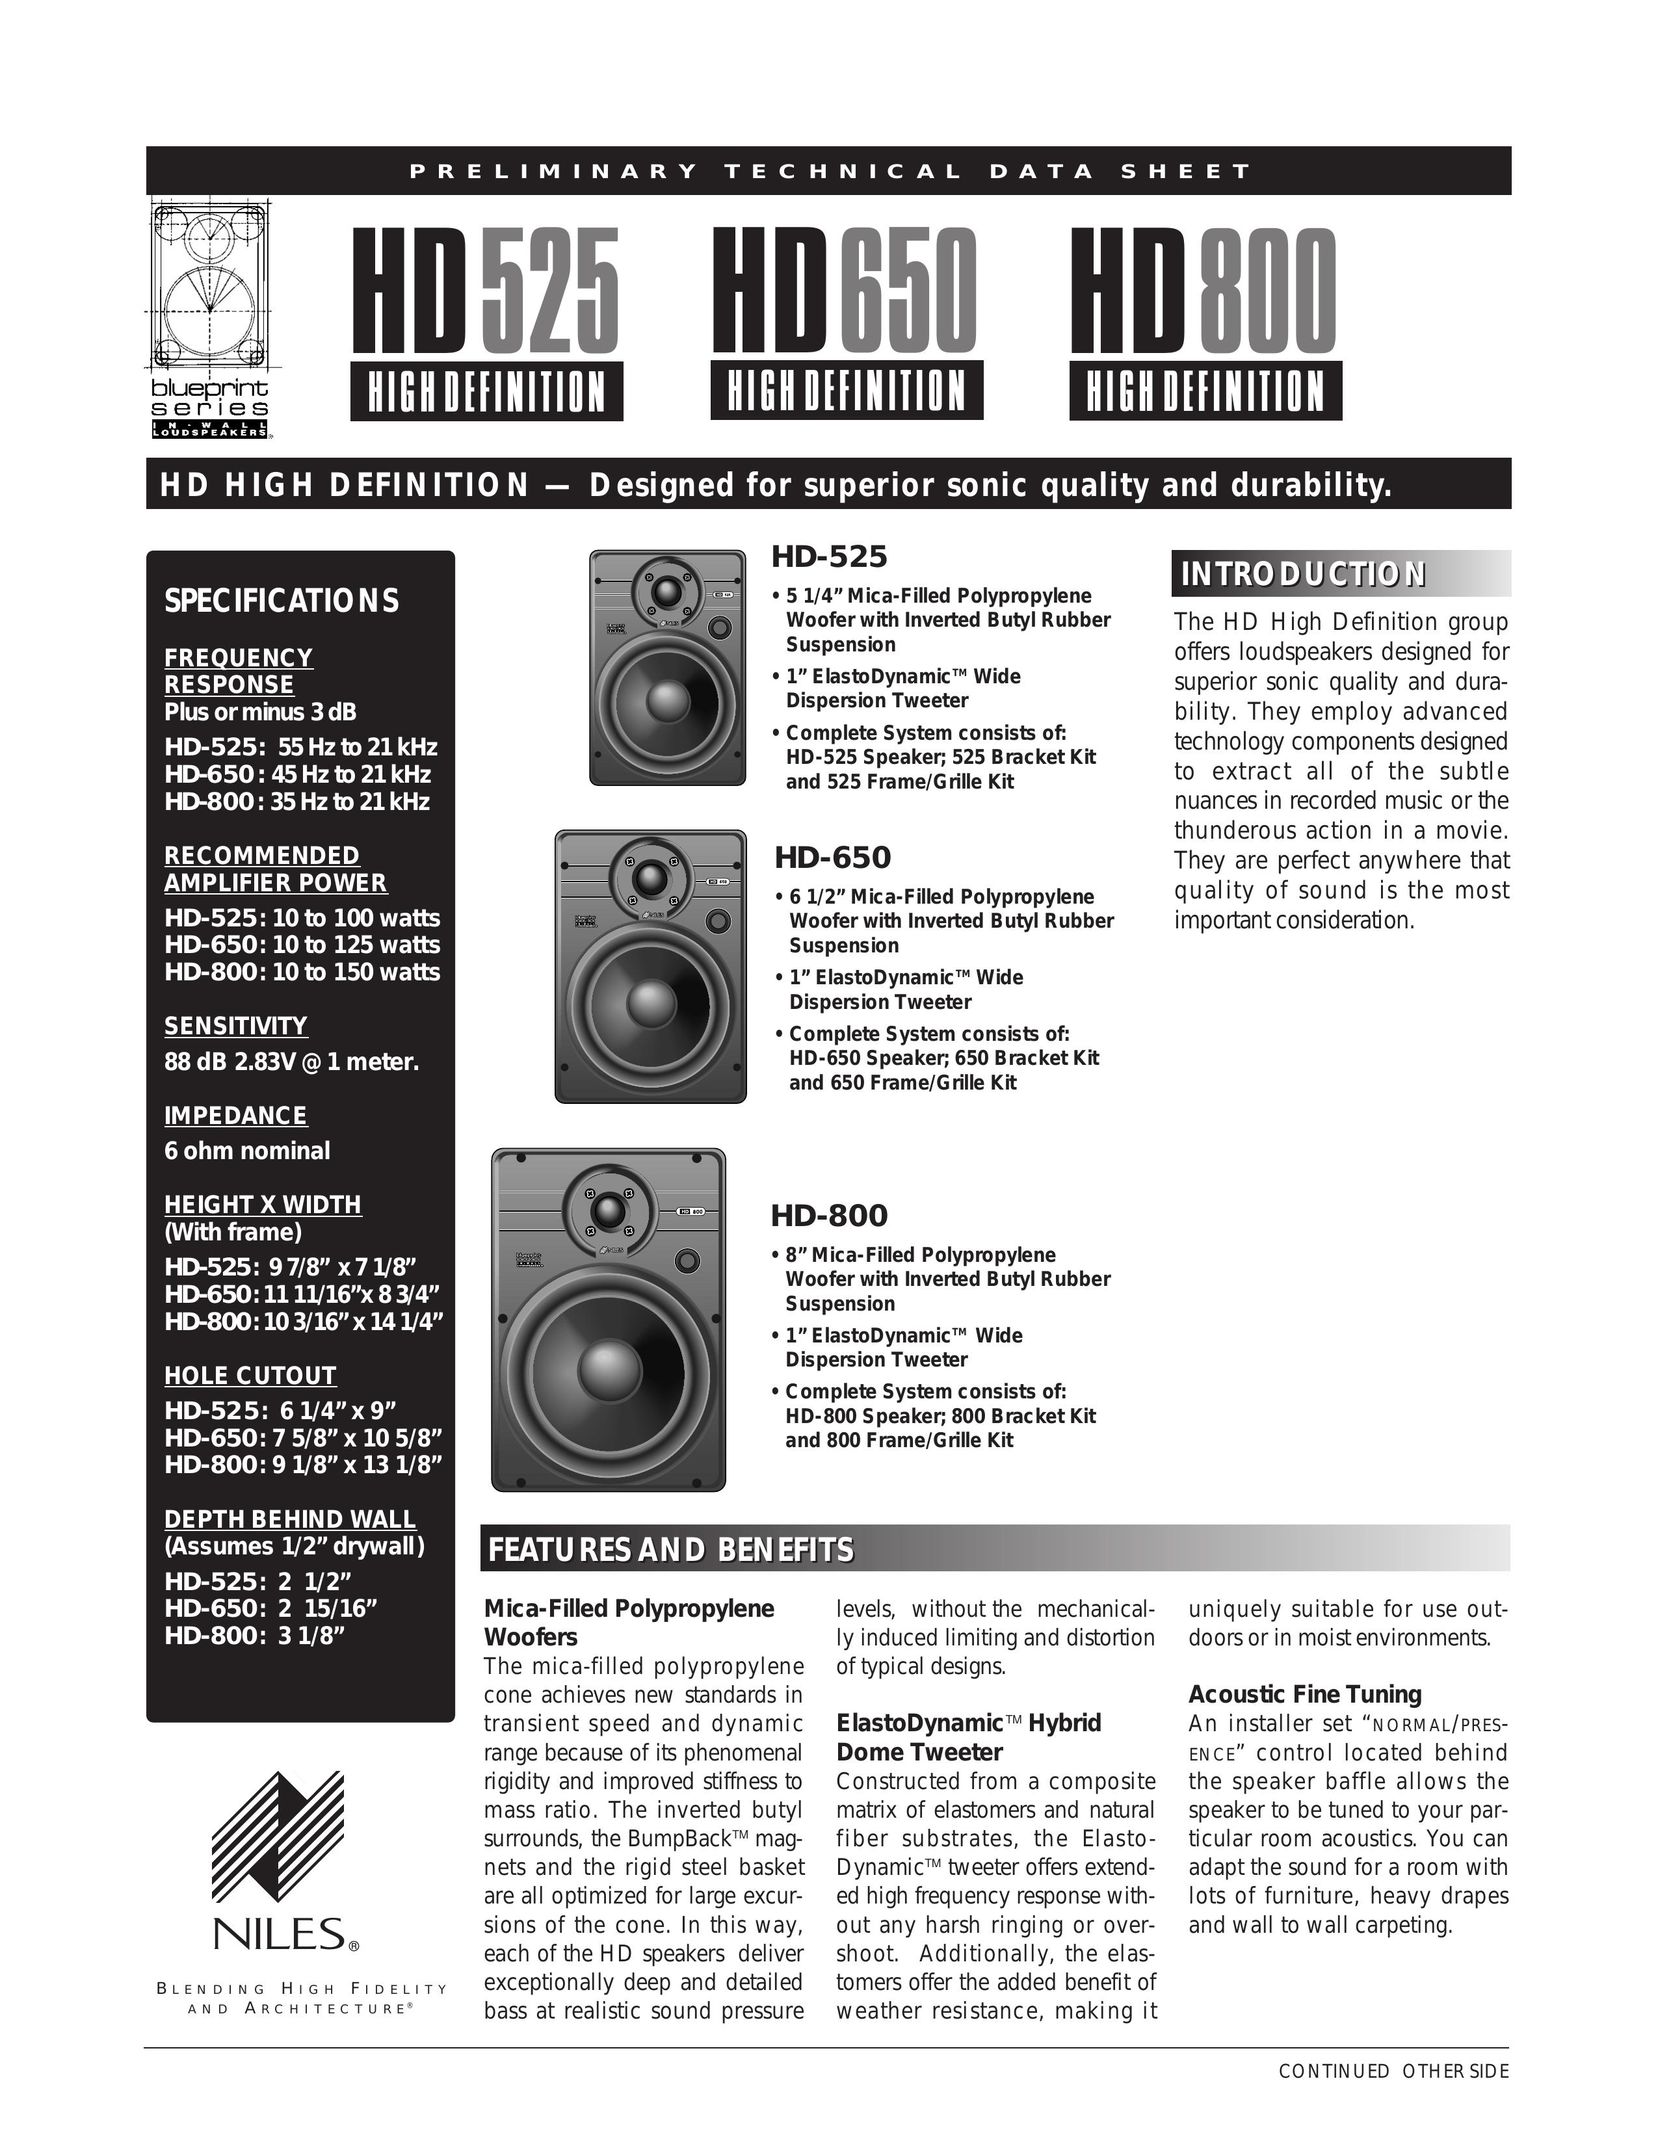 Niles Audio HD-650: 45 Hz to 21 kHz Home Theater System User Manual